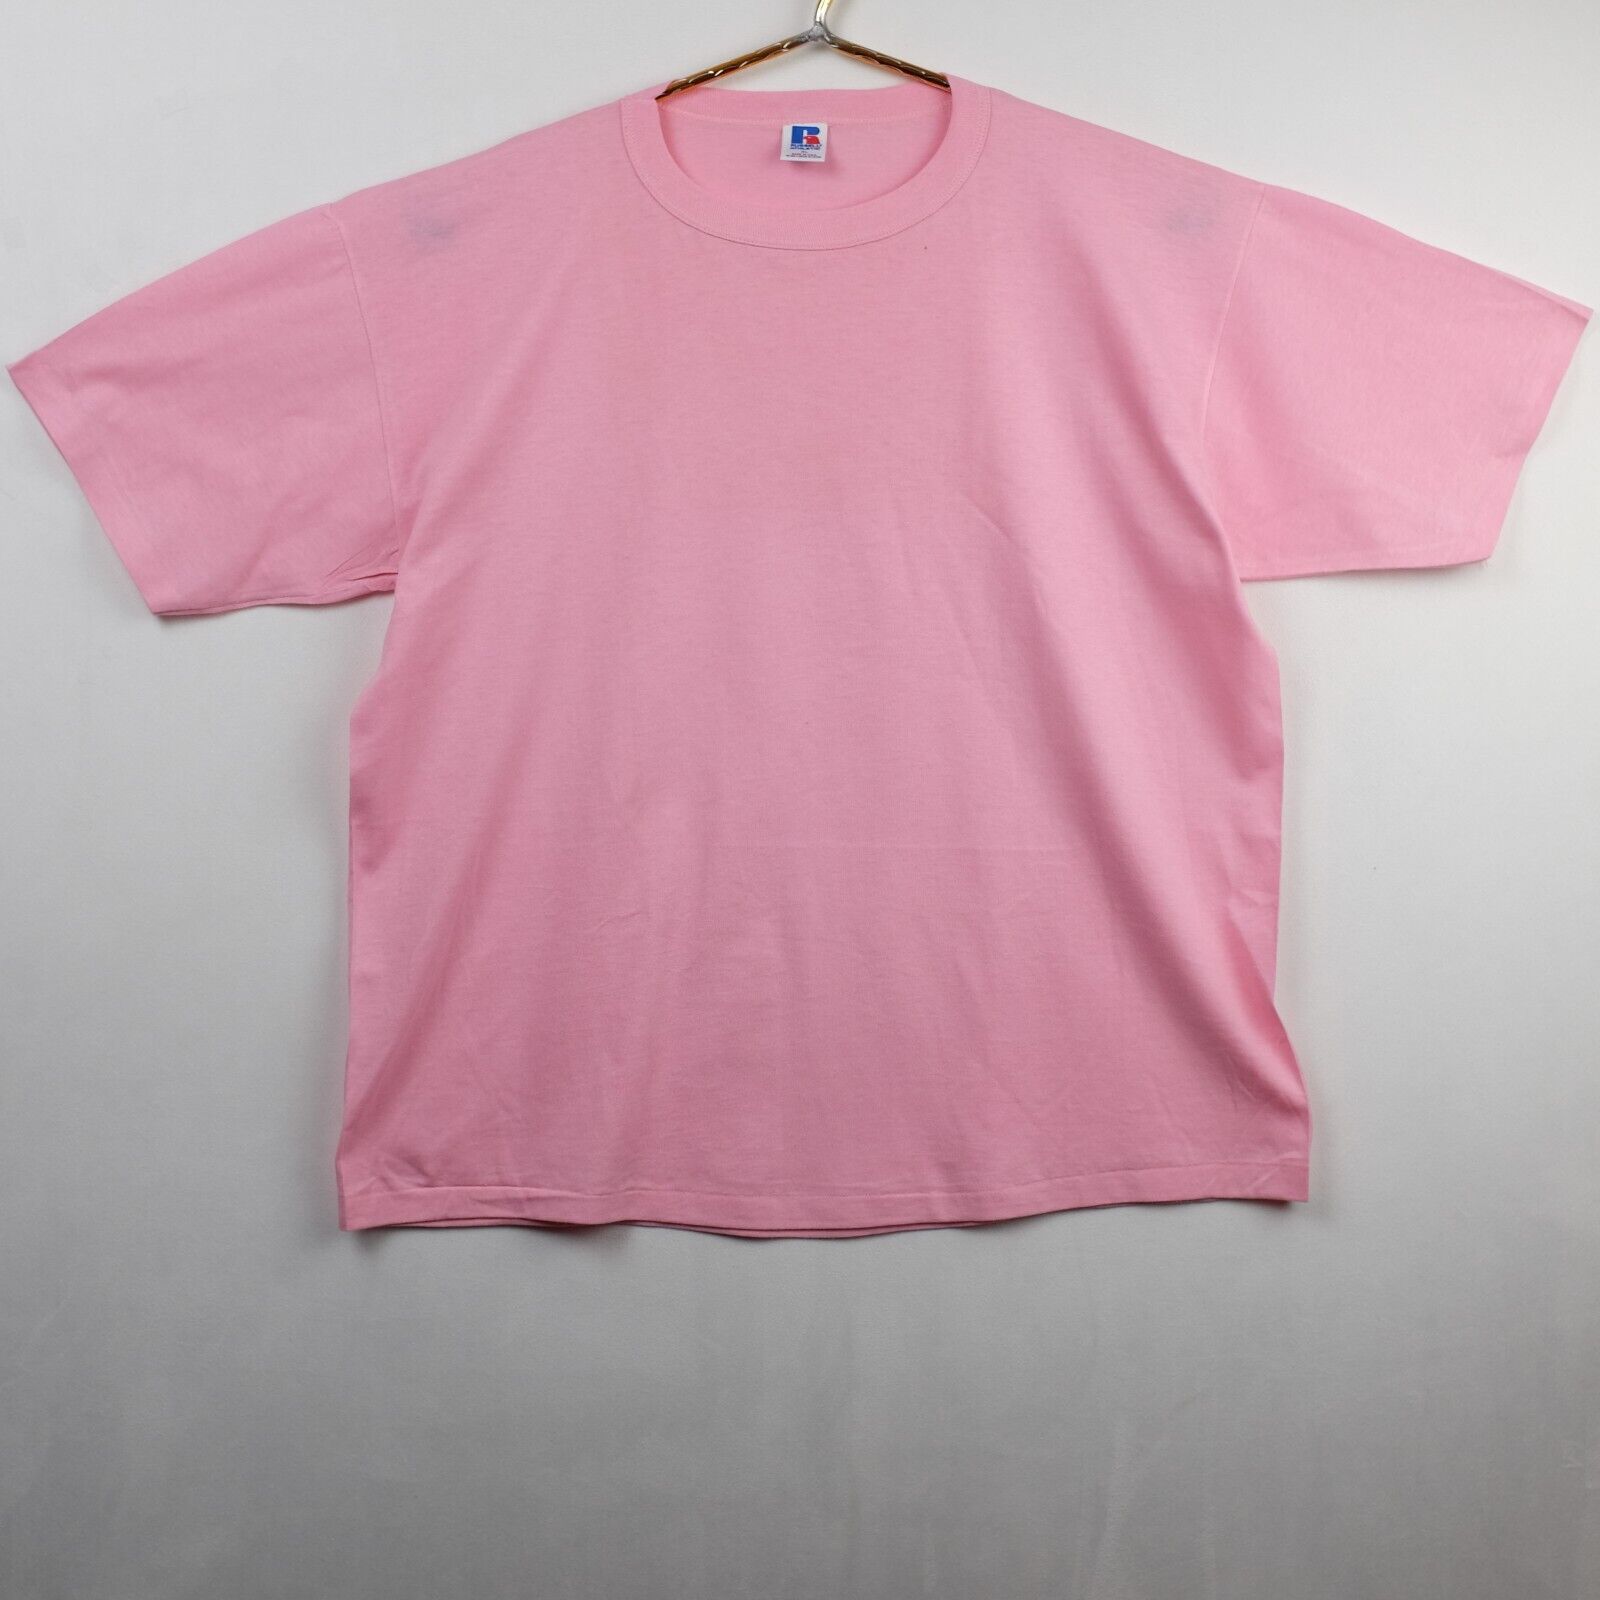 Vintage Russell Athletic Adult Extra Large Lt. Pink Short Sleeve T-Shirt